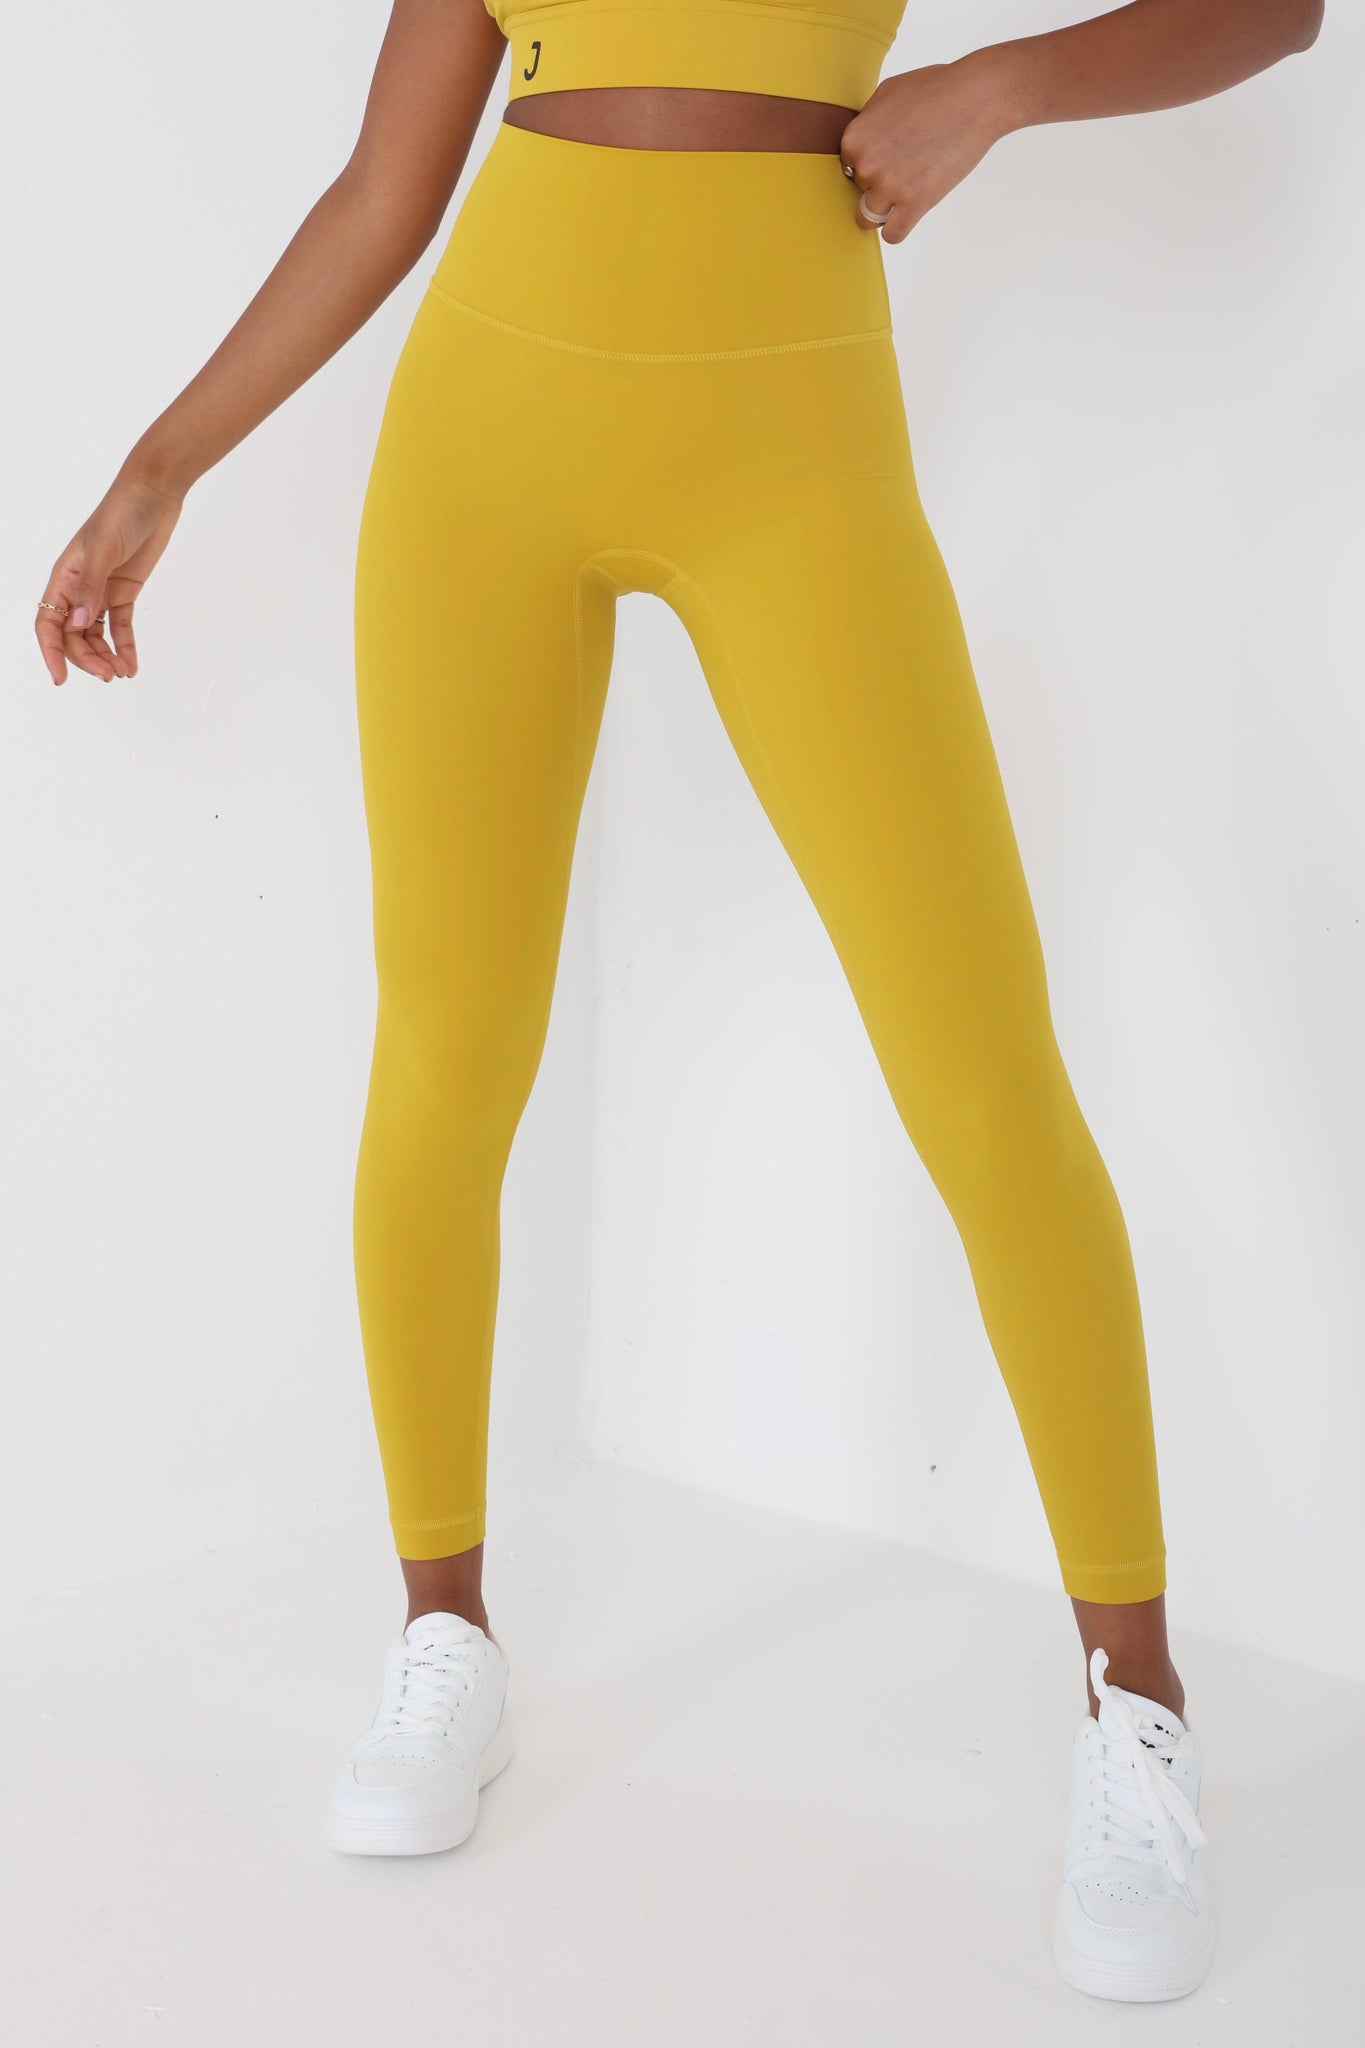 JUV fresh legging in mustard color, close up front view.